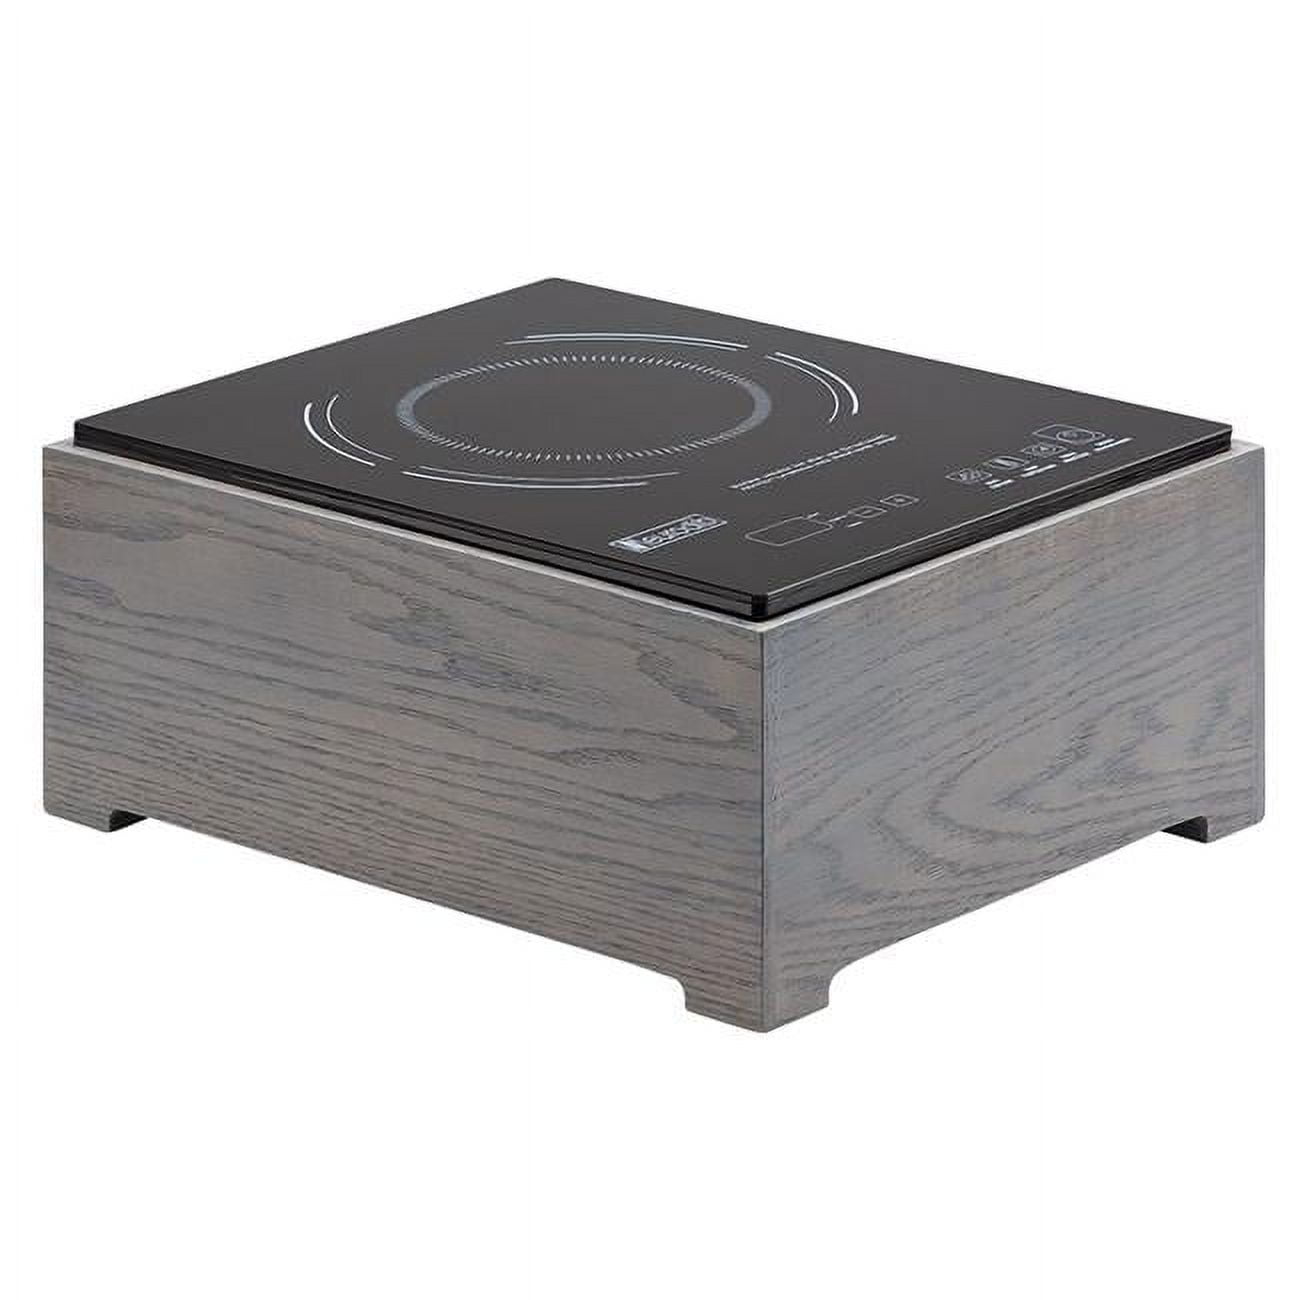 Picture of Cal Mil 3633-83 Ashwood Countertop Induction Cooker - 120V, 1600W - 12.75 x 15.875 x 7.125 in.